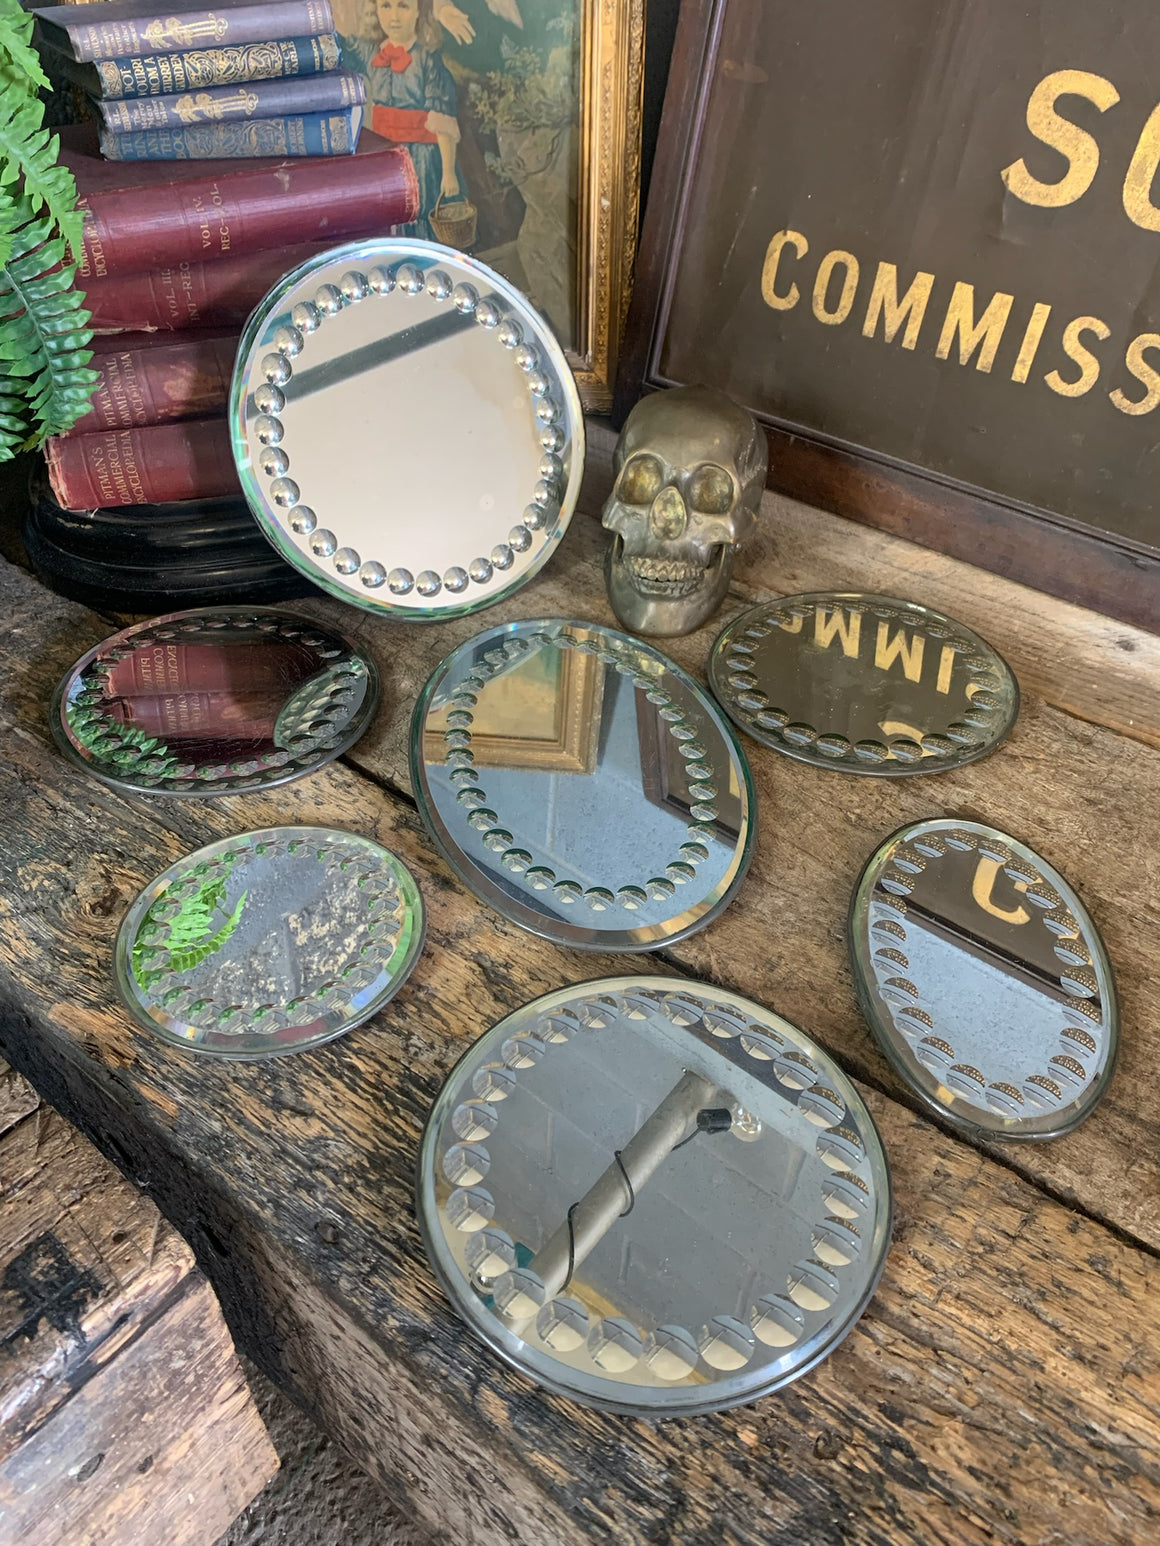 A collection of seven sorcerer's mirrors